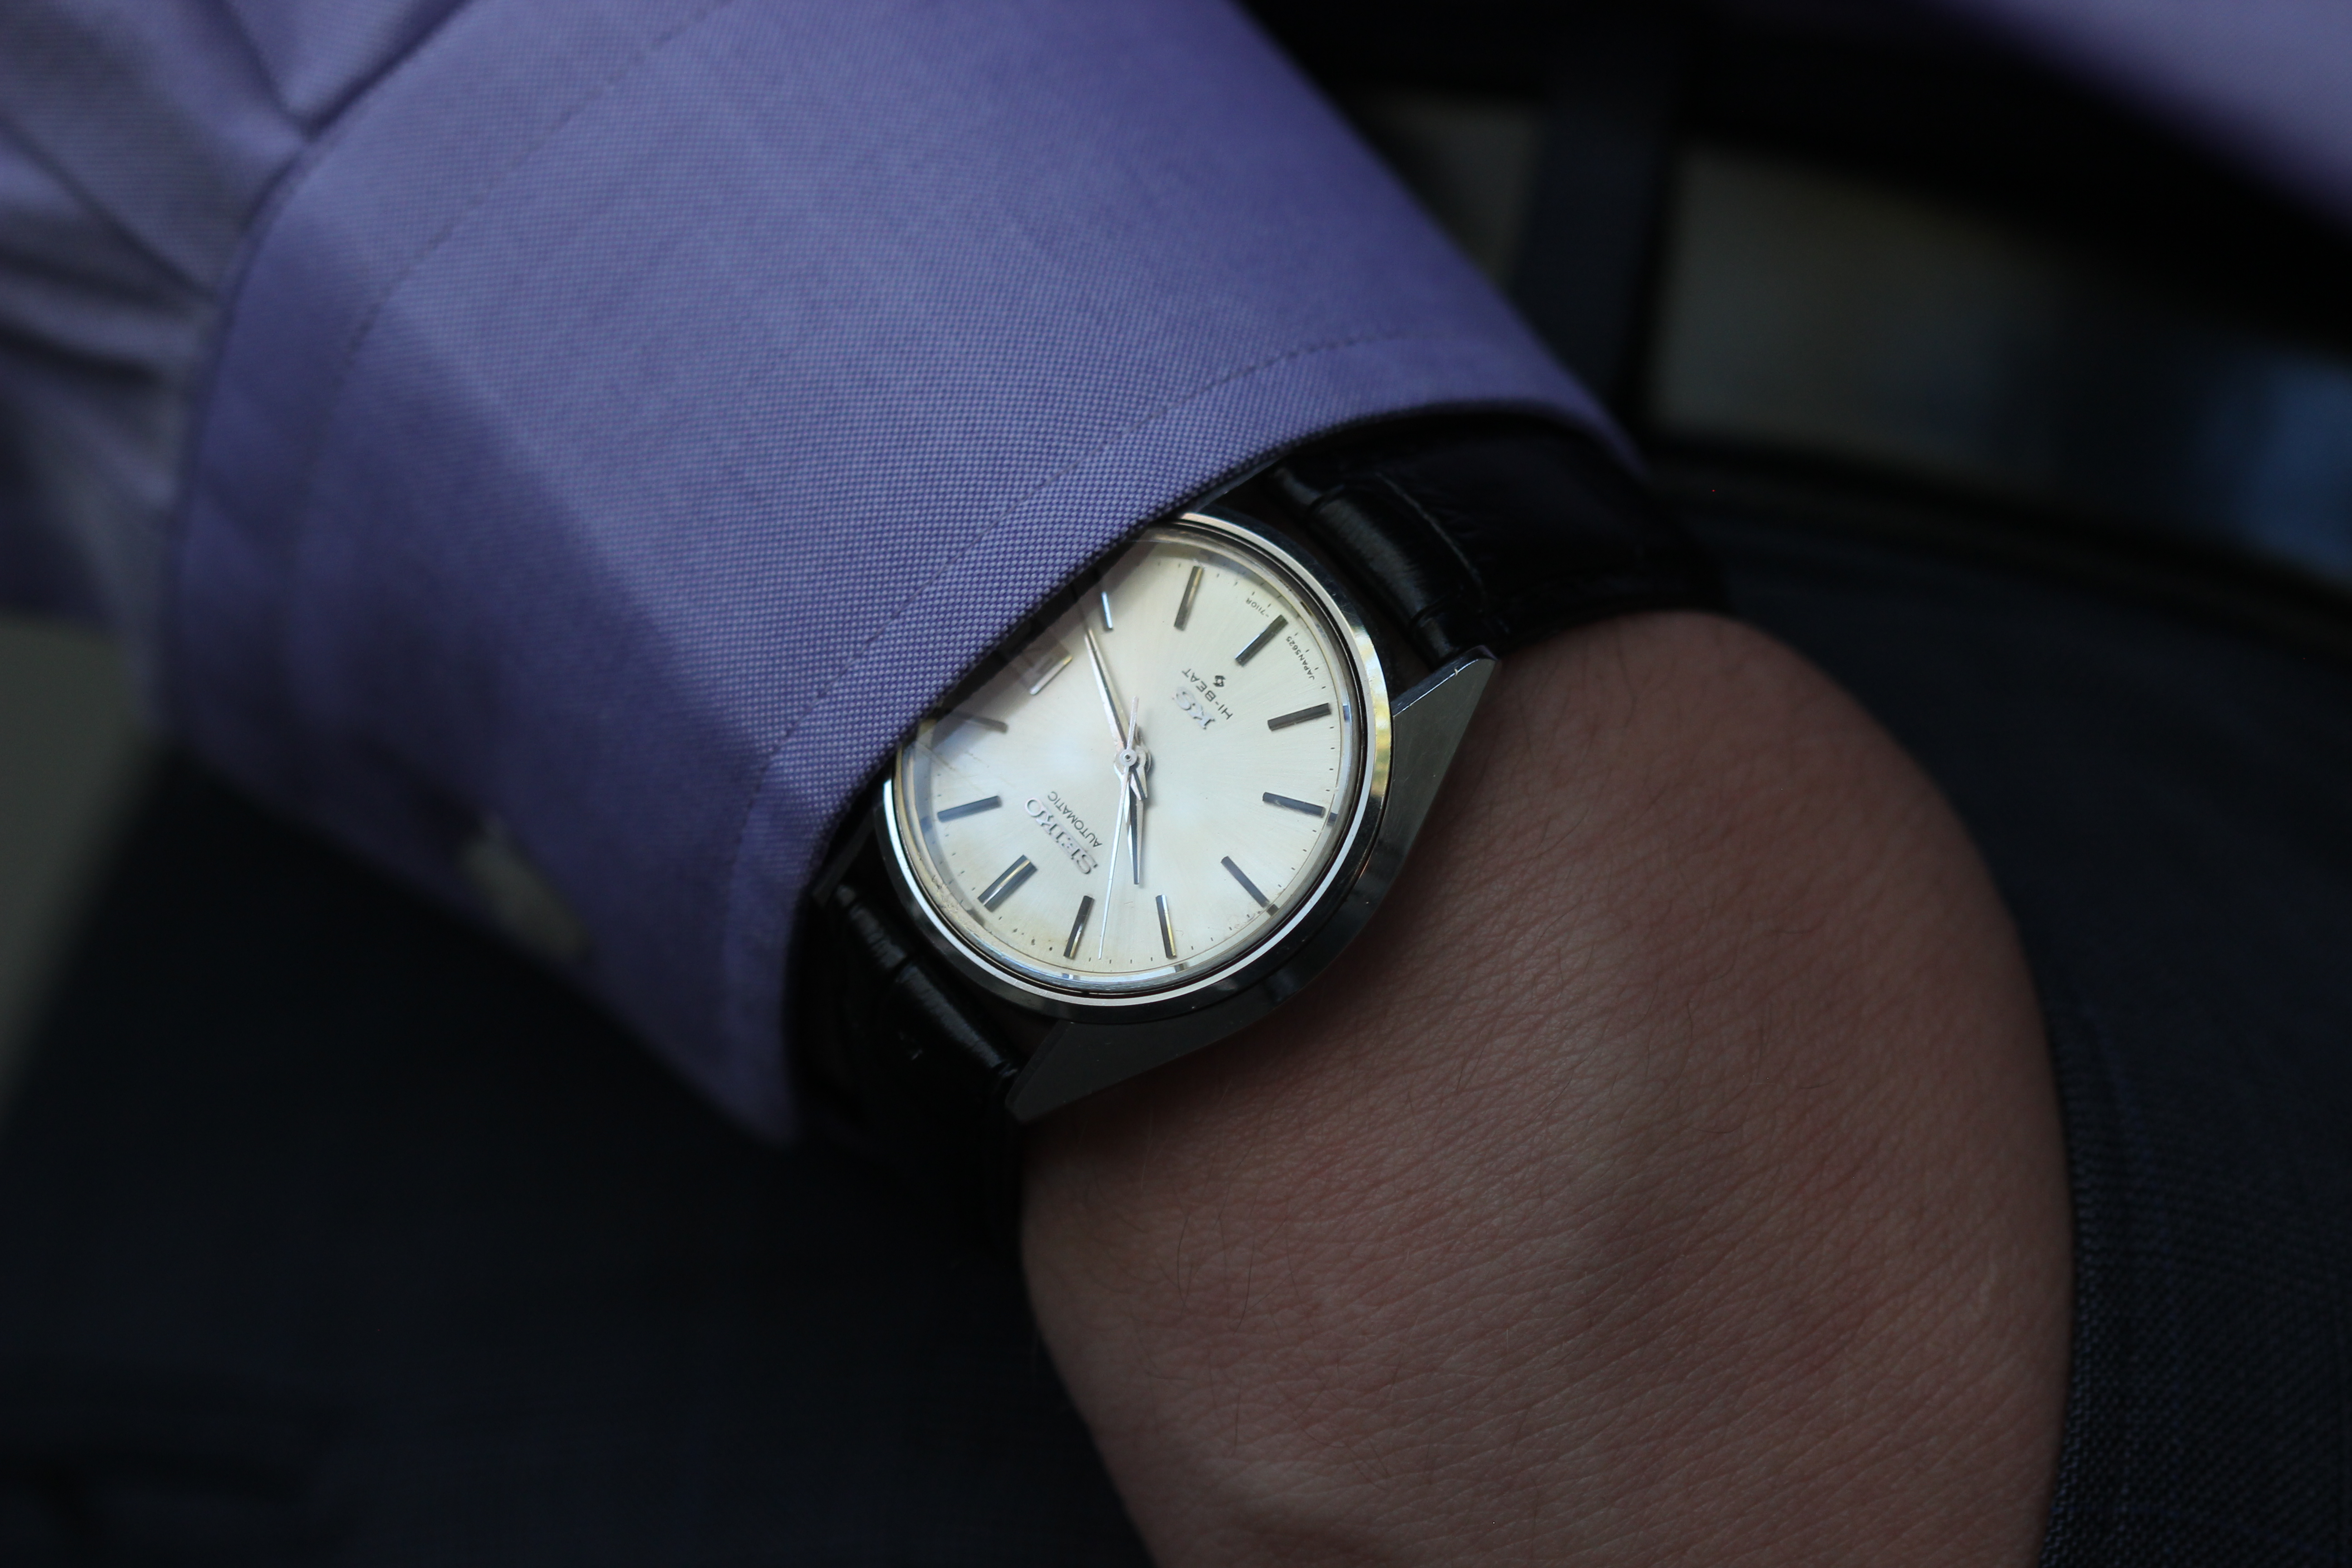 Vintage Review: King Seiko Ref. 5625-7111 Watch